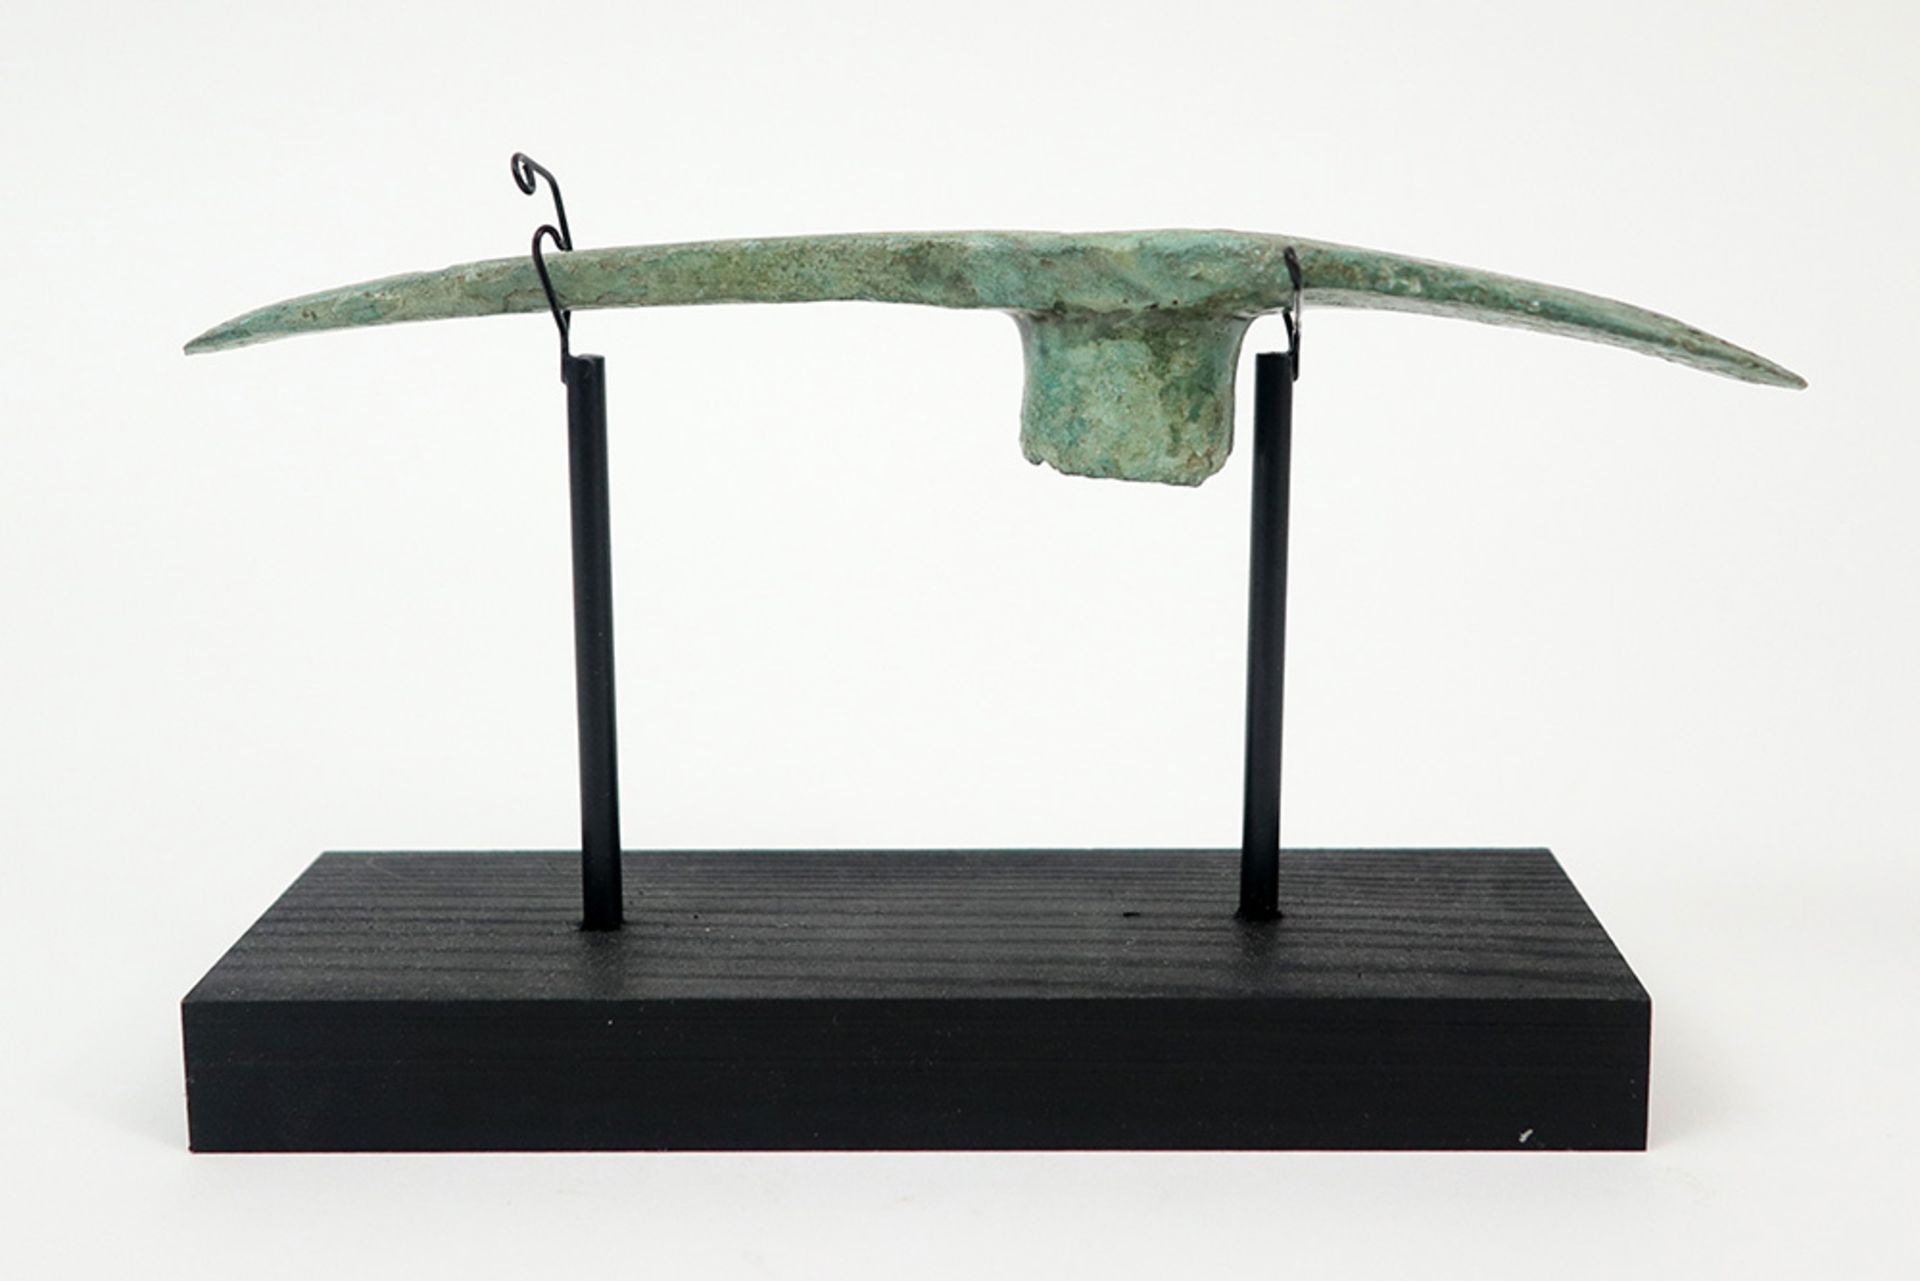 Ancient Persian Luristan Culture ceremonial axe in bronze with nice patina - with stand with XRF